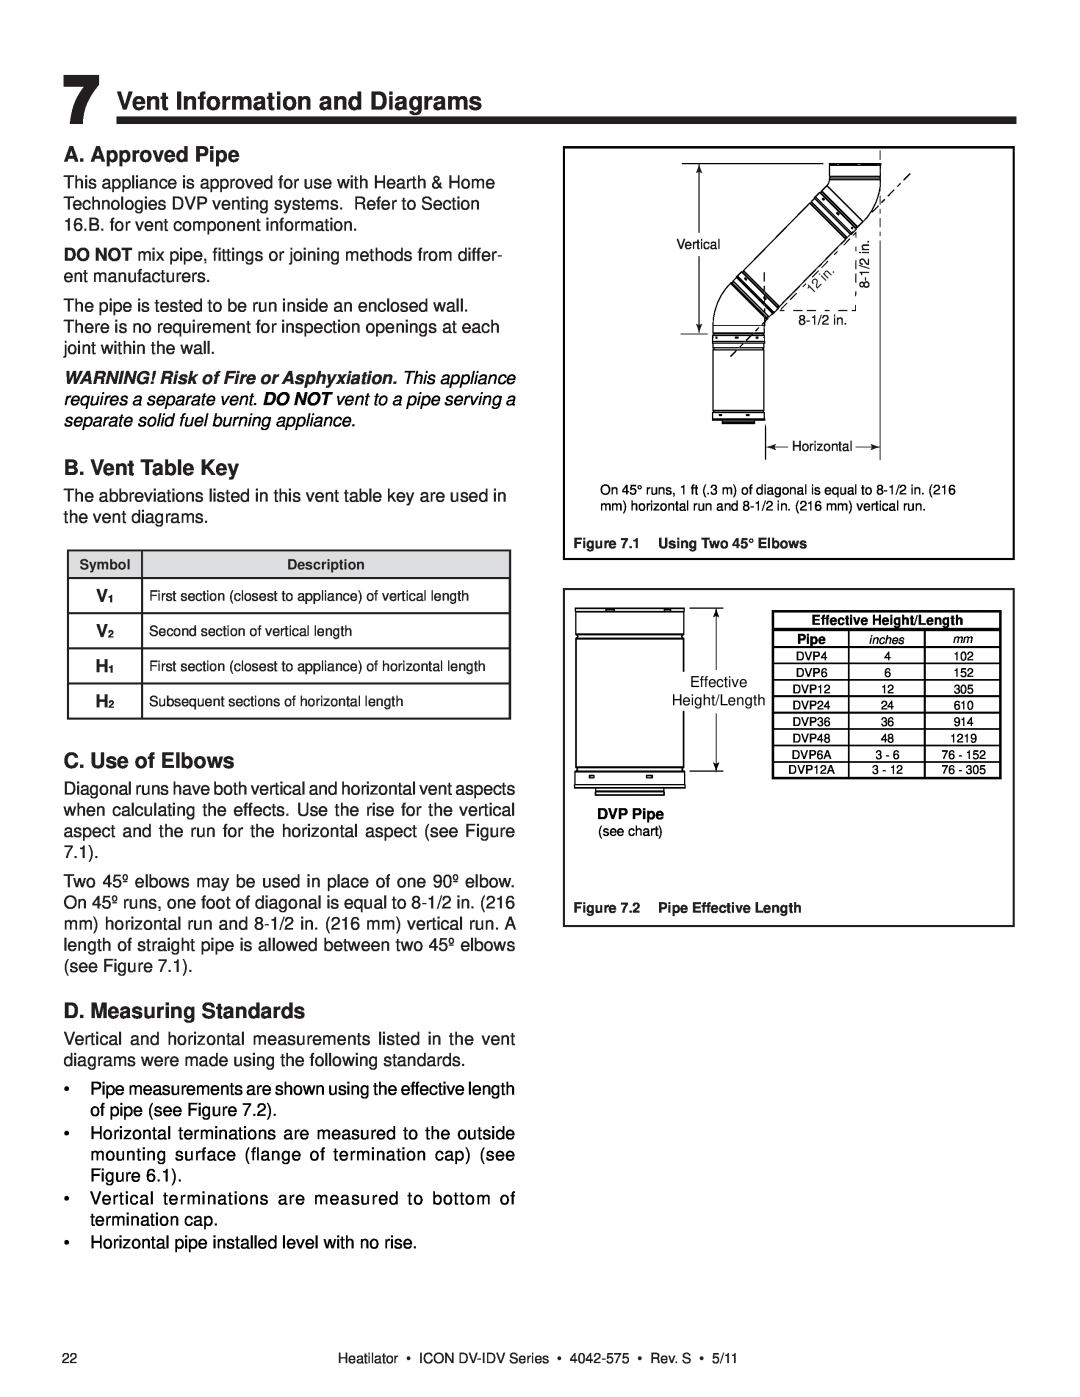 Heatiator IDV4833IT owner manual Vent Information and Diagrams, A. Approved Pipe, B. Vent Table Key, C. Use of Elbows 